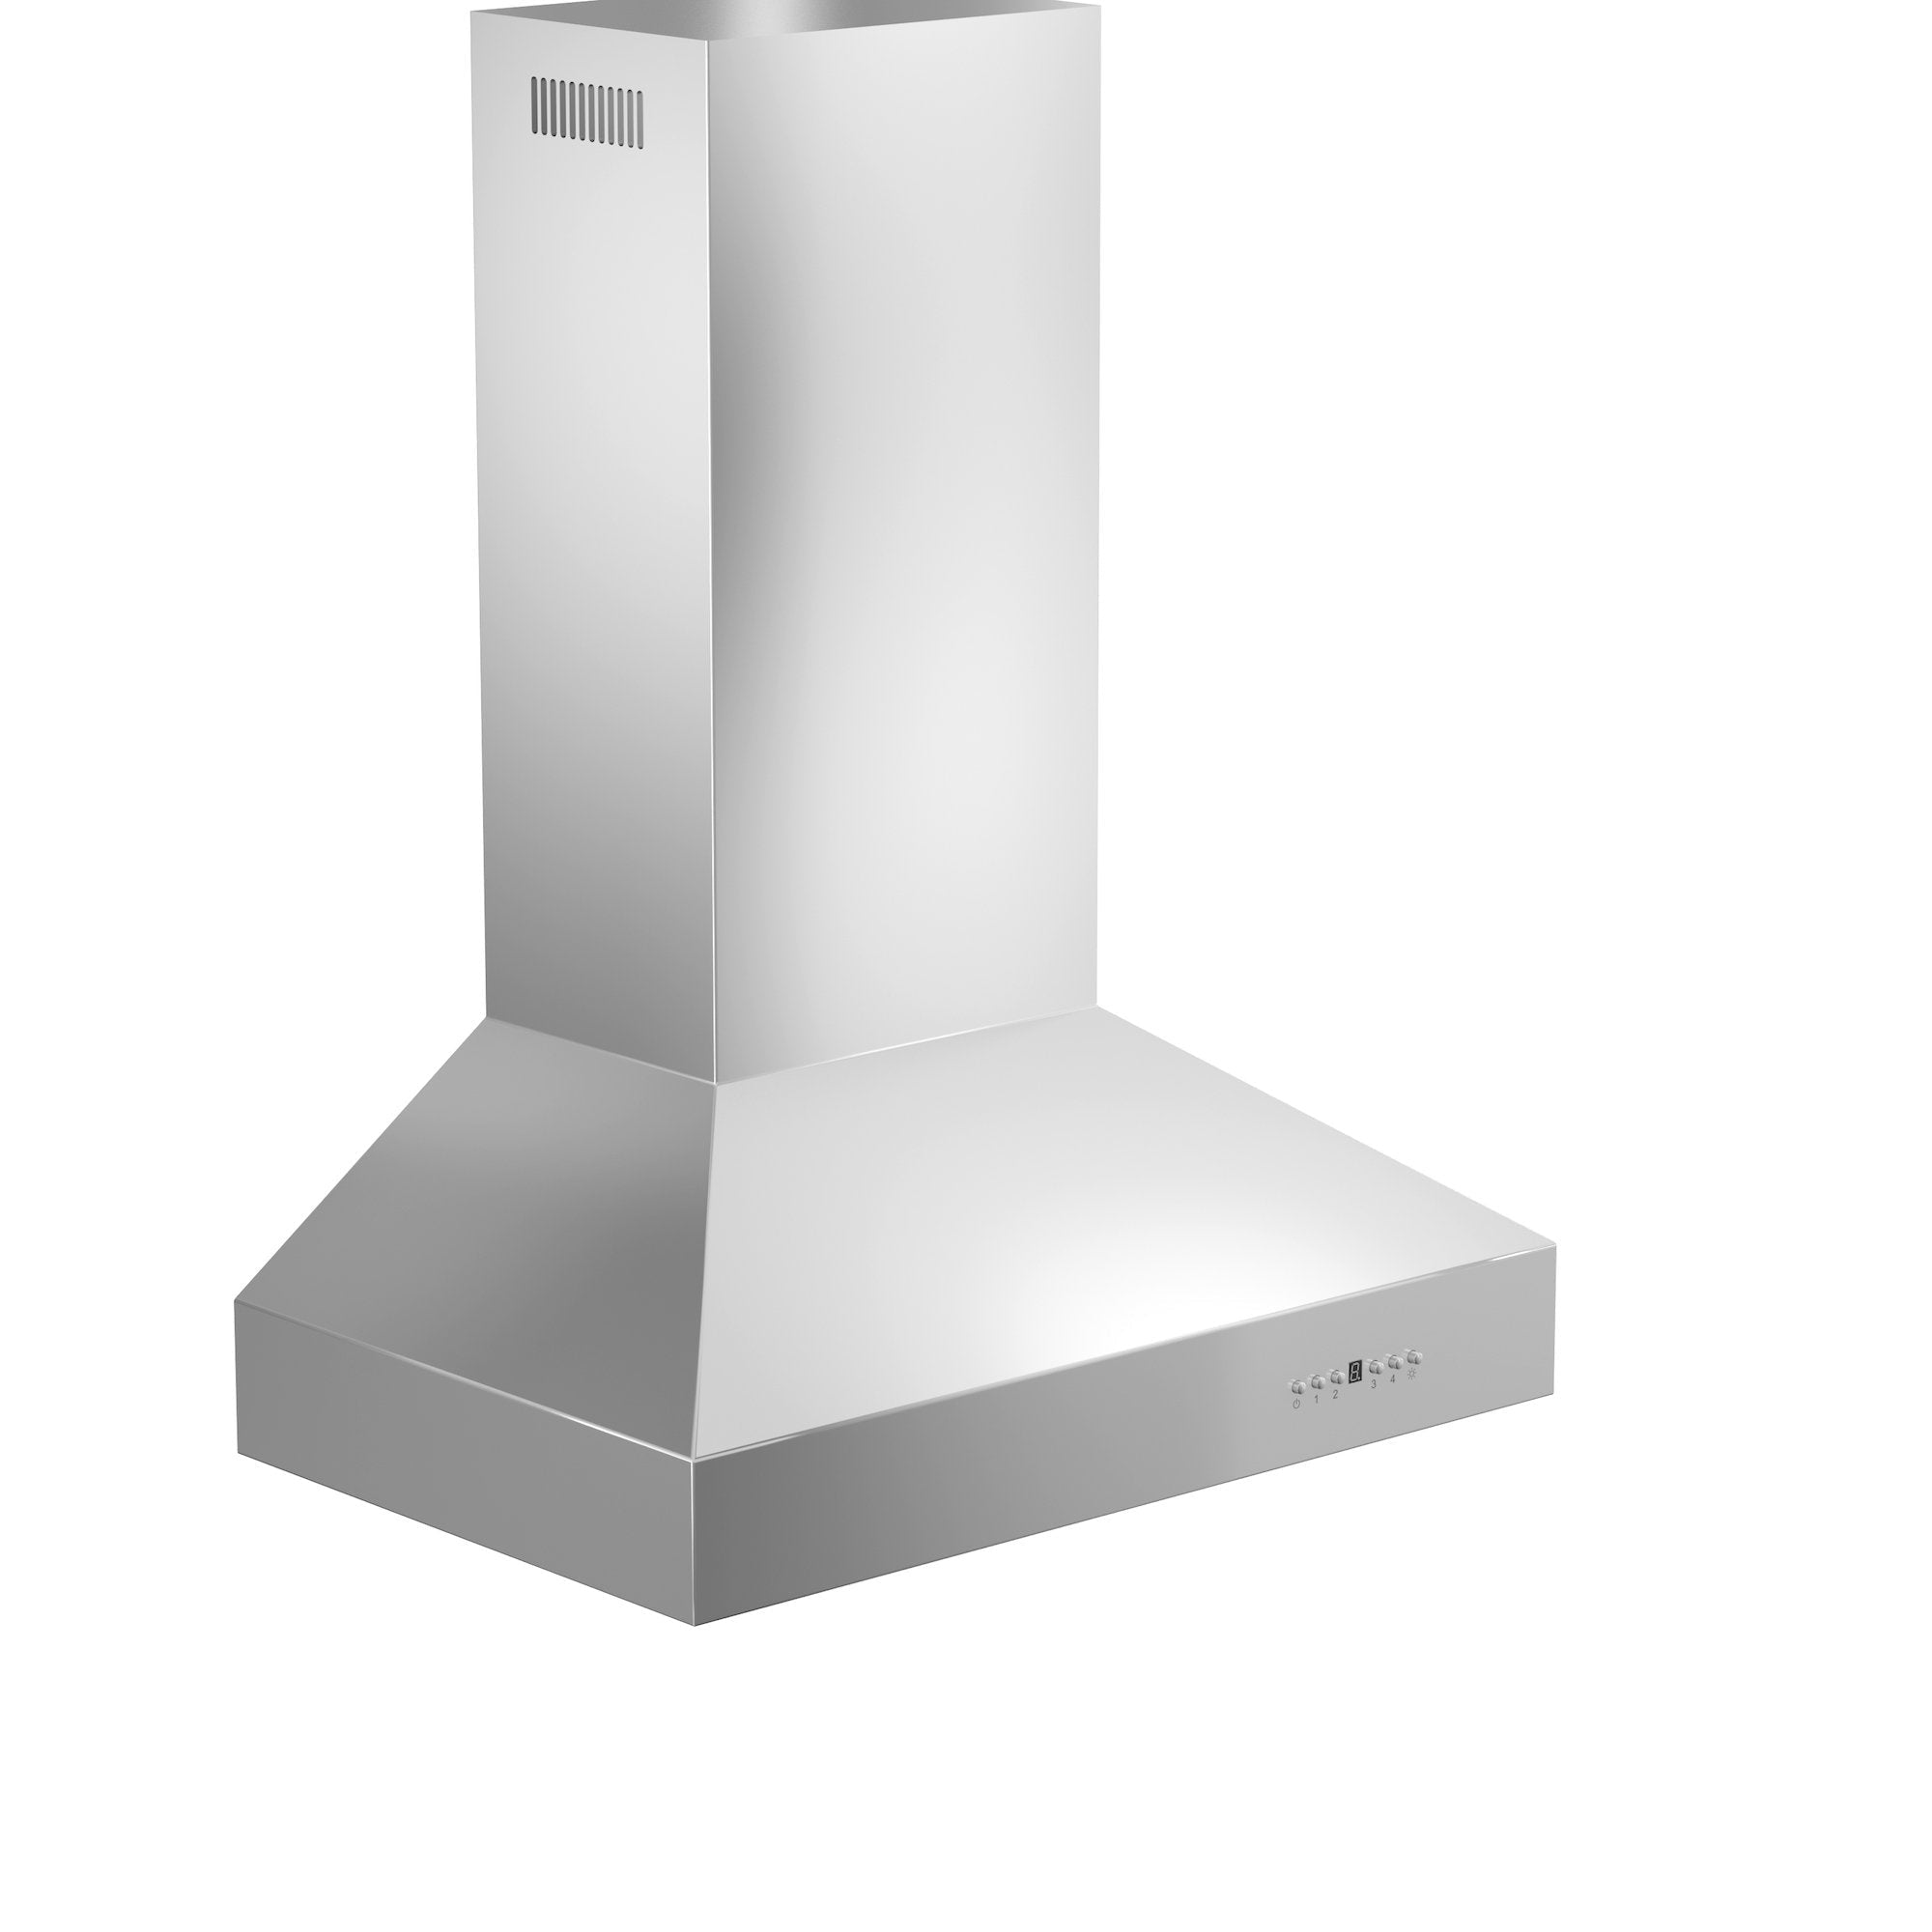 ZLINE Ducted Wall Mount Range Hood in Outdoor Approved Stainless Steel (697-304) side from above.